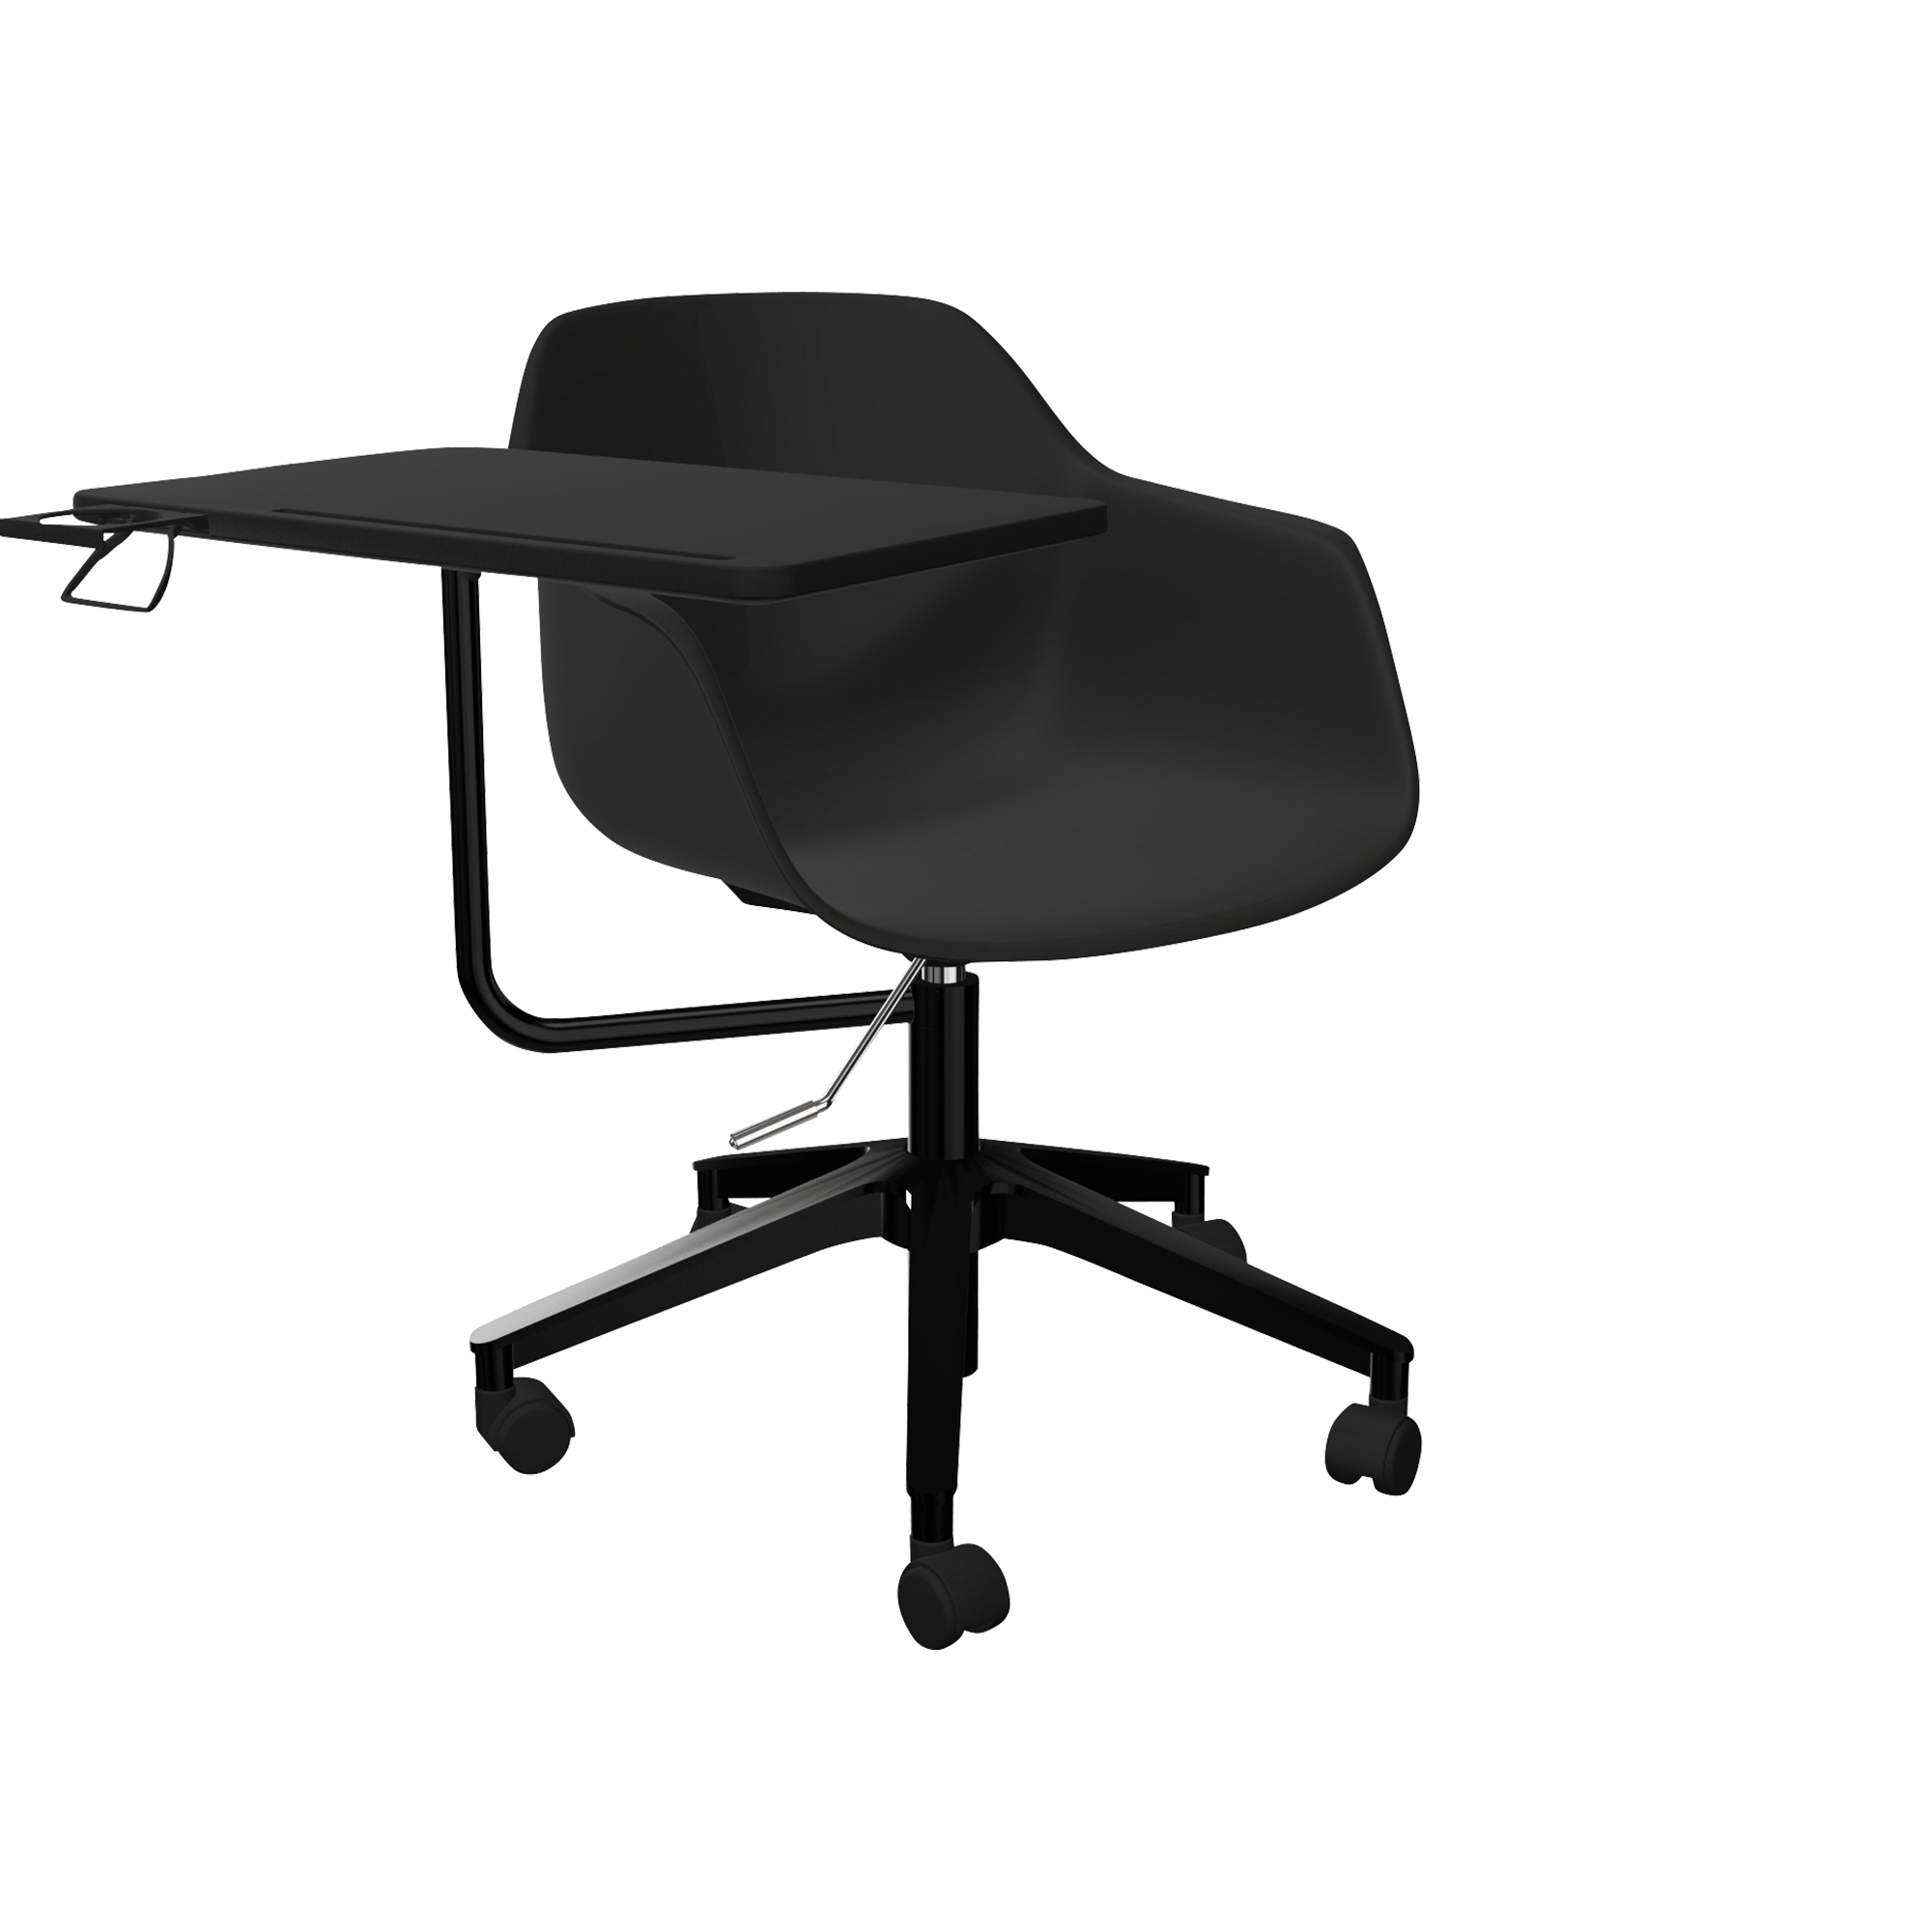 A black office chair with a desk and wheels.